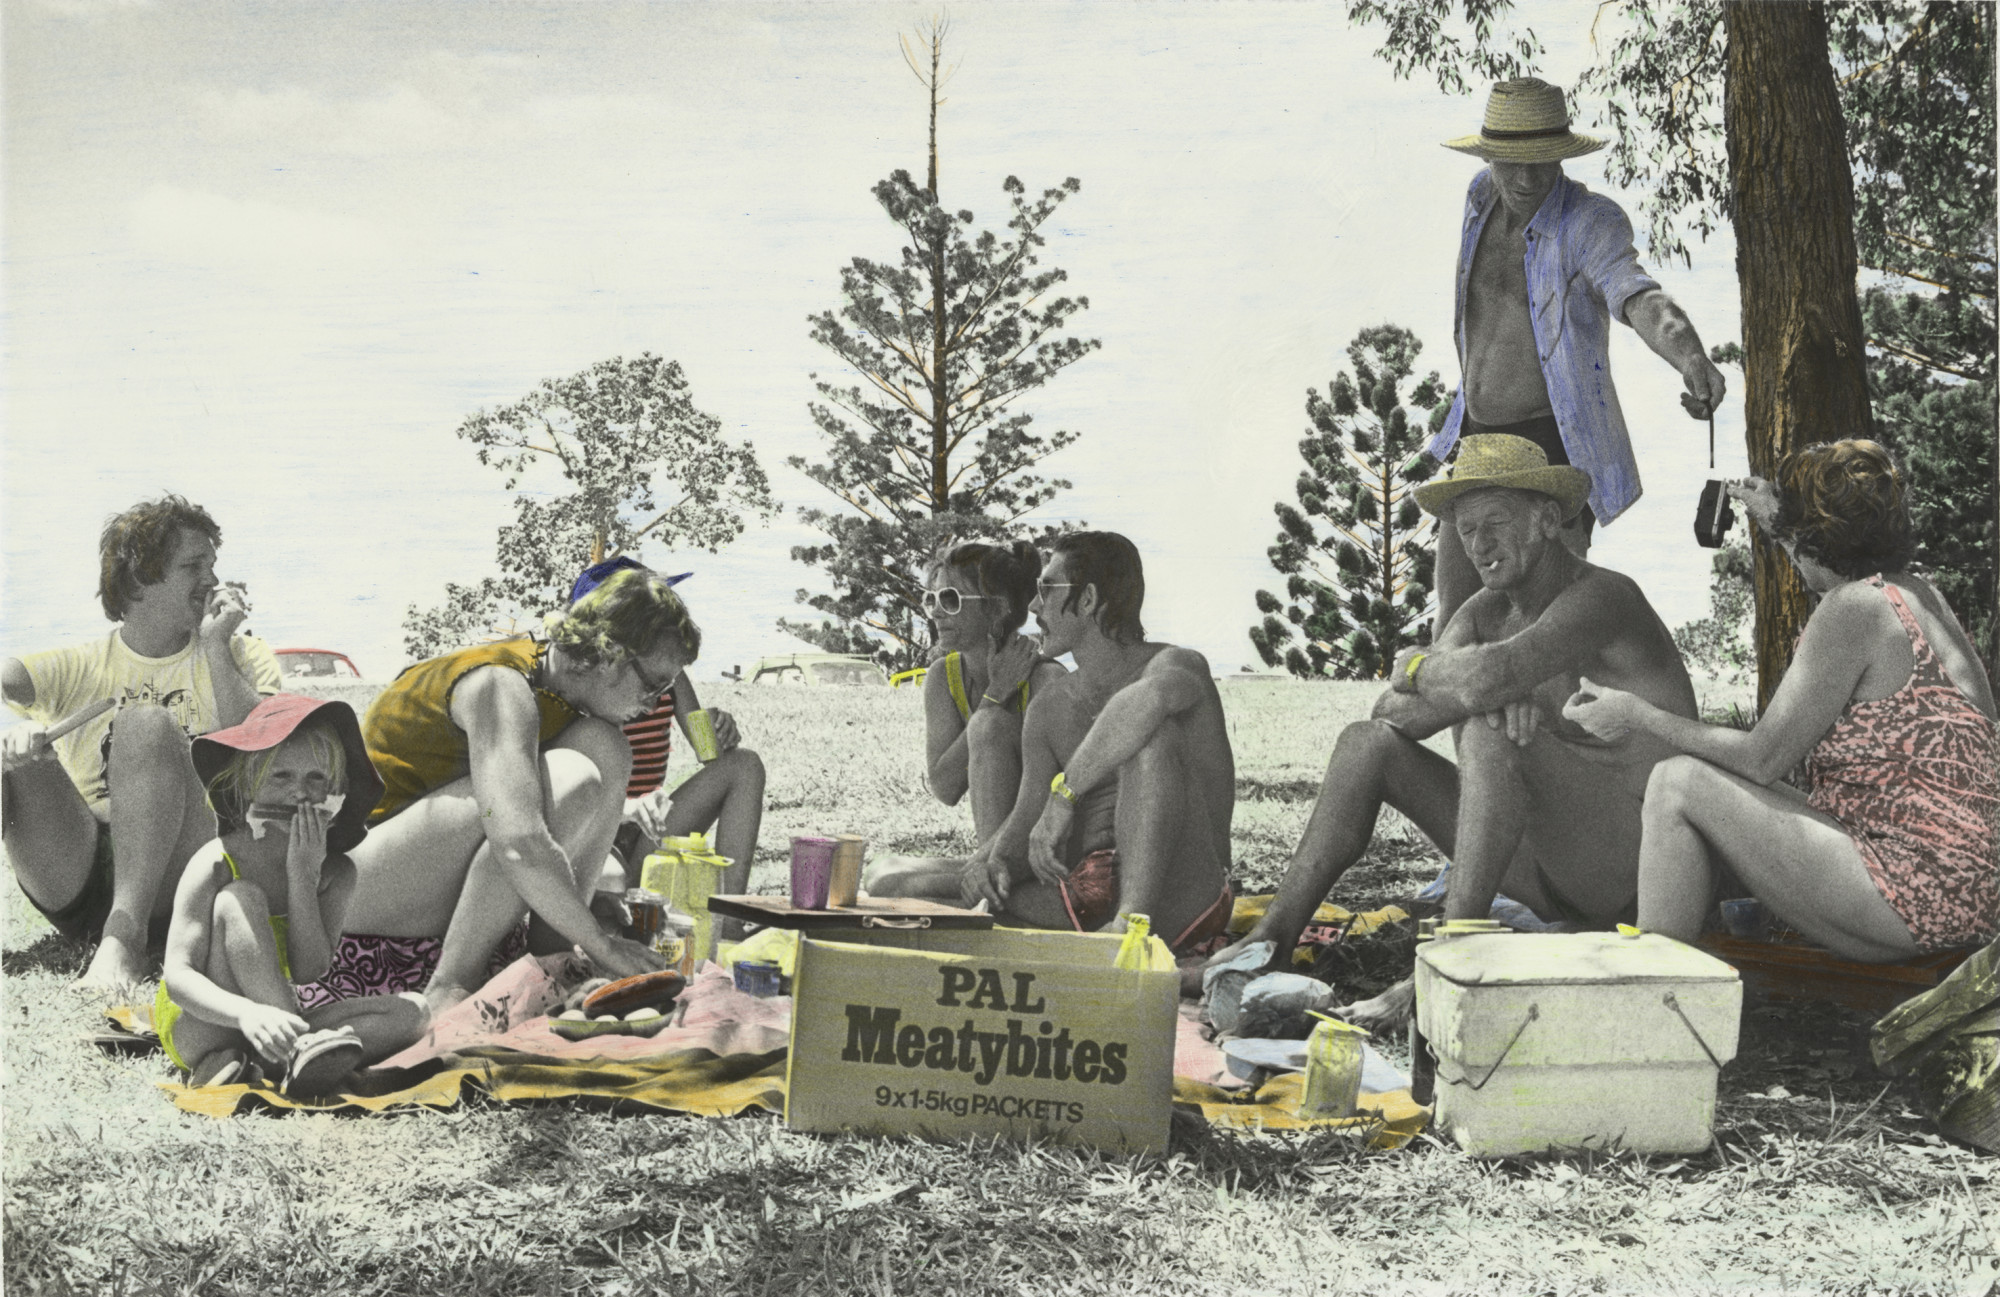 Ruth Maddison, <em>Untitled #18</em>, 1979, from the series Christmas holidays with Bob’s family. Mermaid Beach, Queensland 1979, pigment print from scan, edition 1/1, 10.5 x 16.2 cm. Courtesy of the artist and the Centre for Contemporary Photography.